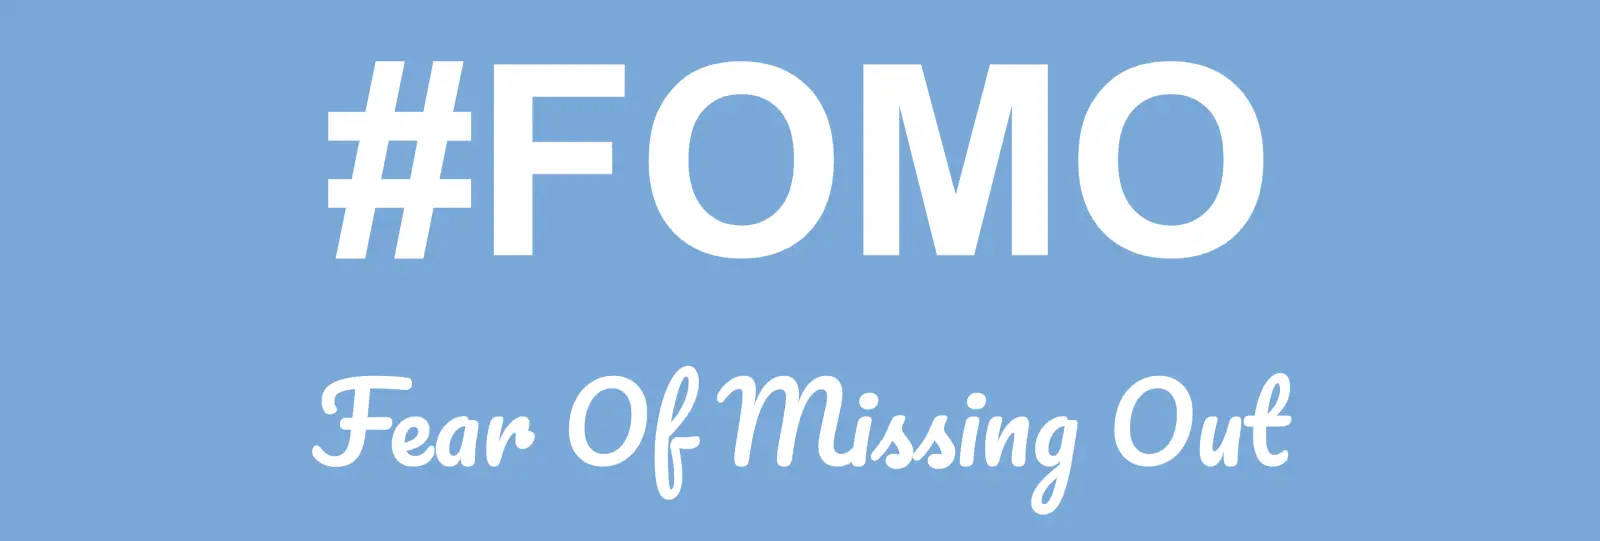 10 signs that you suffer from FOMO (and how you convert it to JOMO)